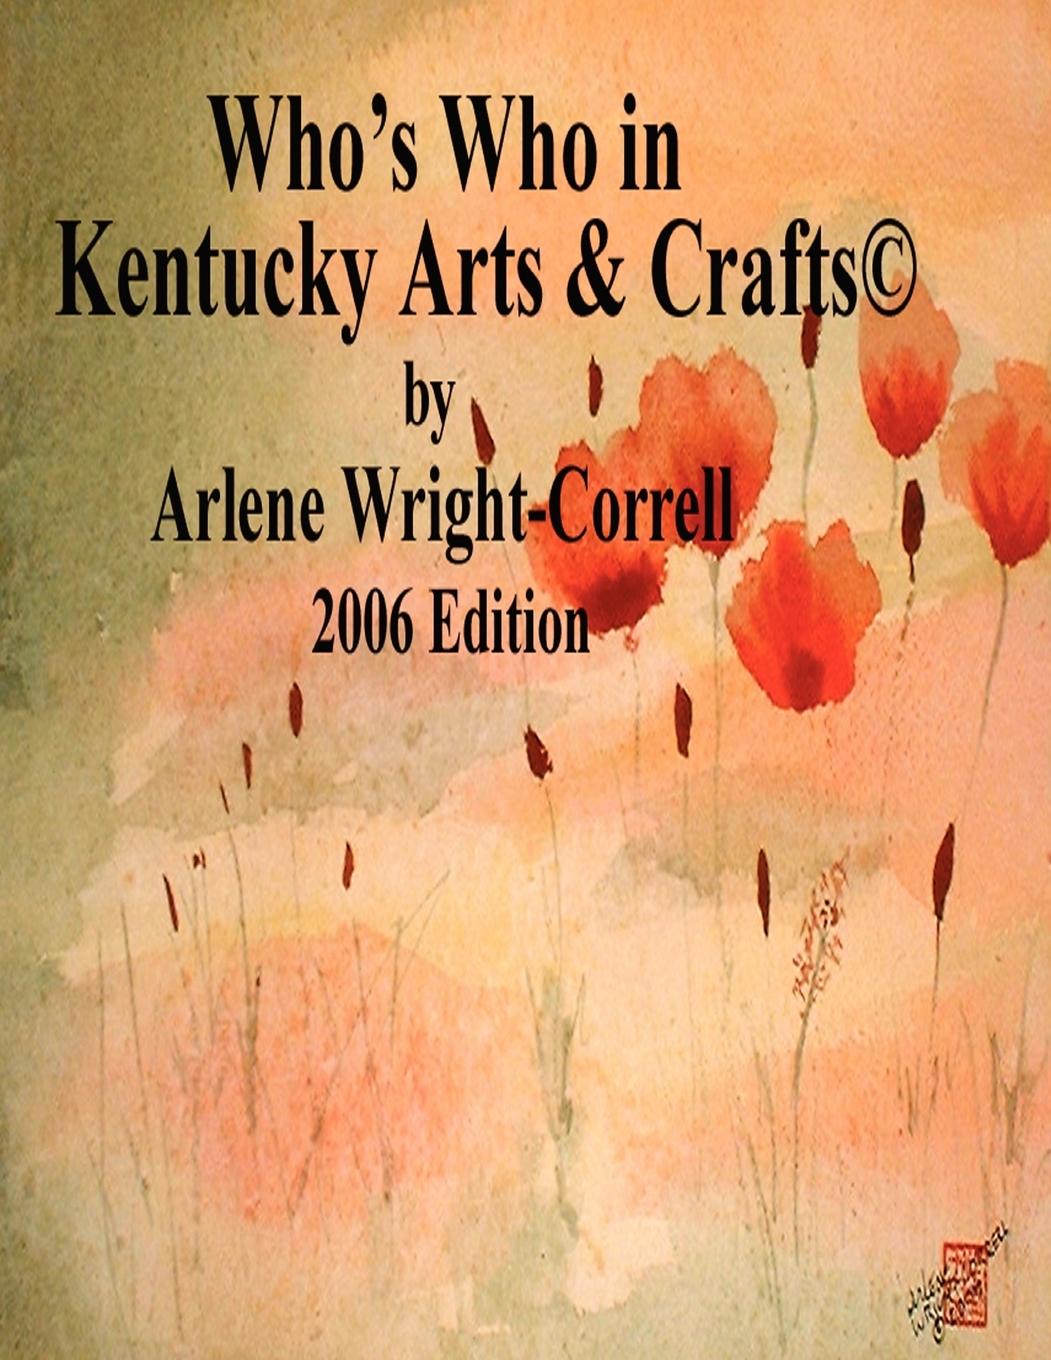 Who s Who in Kentucky Arts & Crafts(c) 2006 Edition - Wright-Correll, Arlene